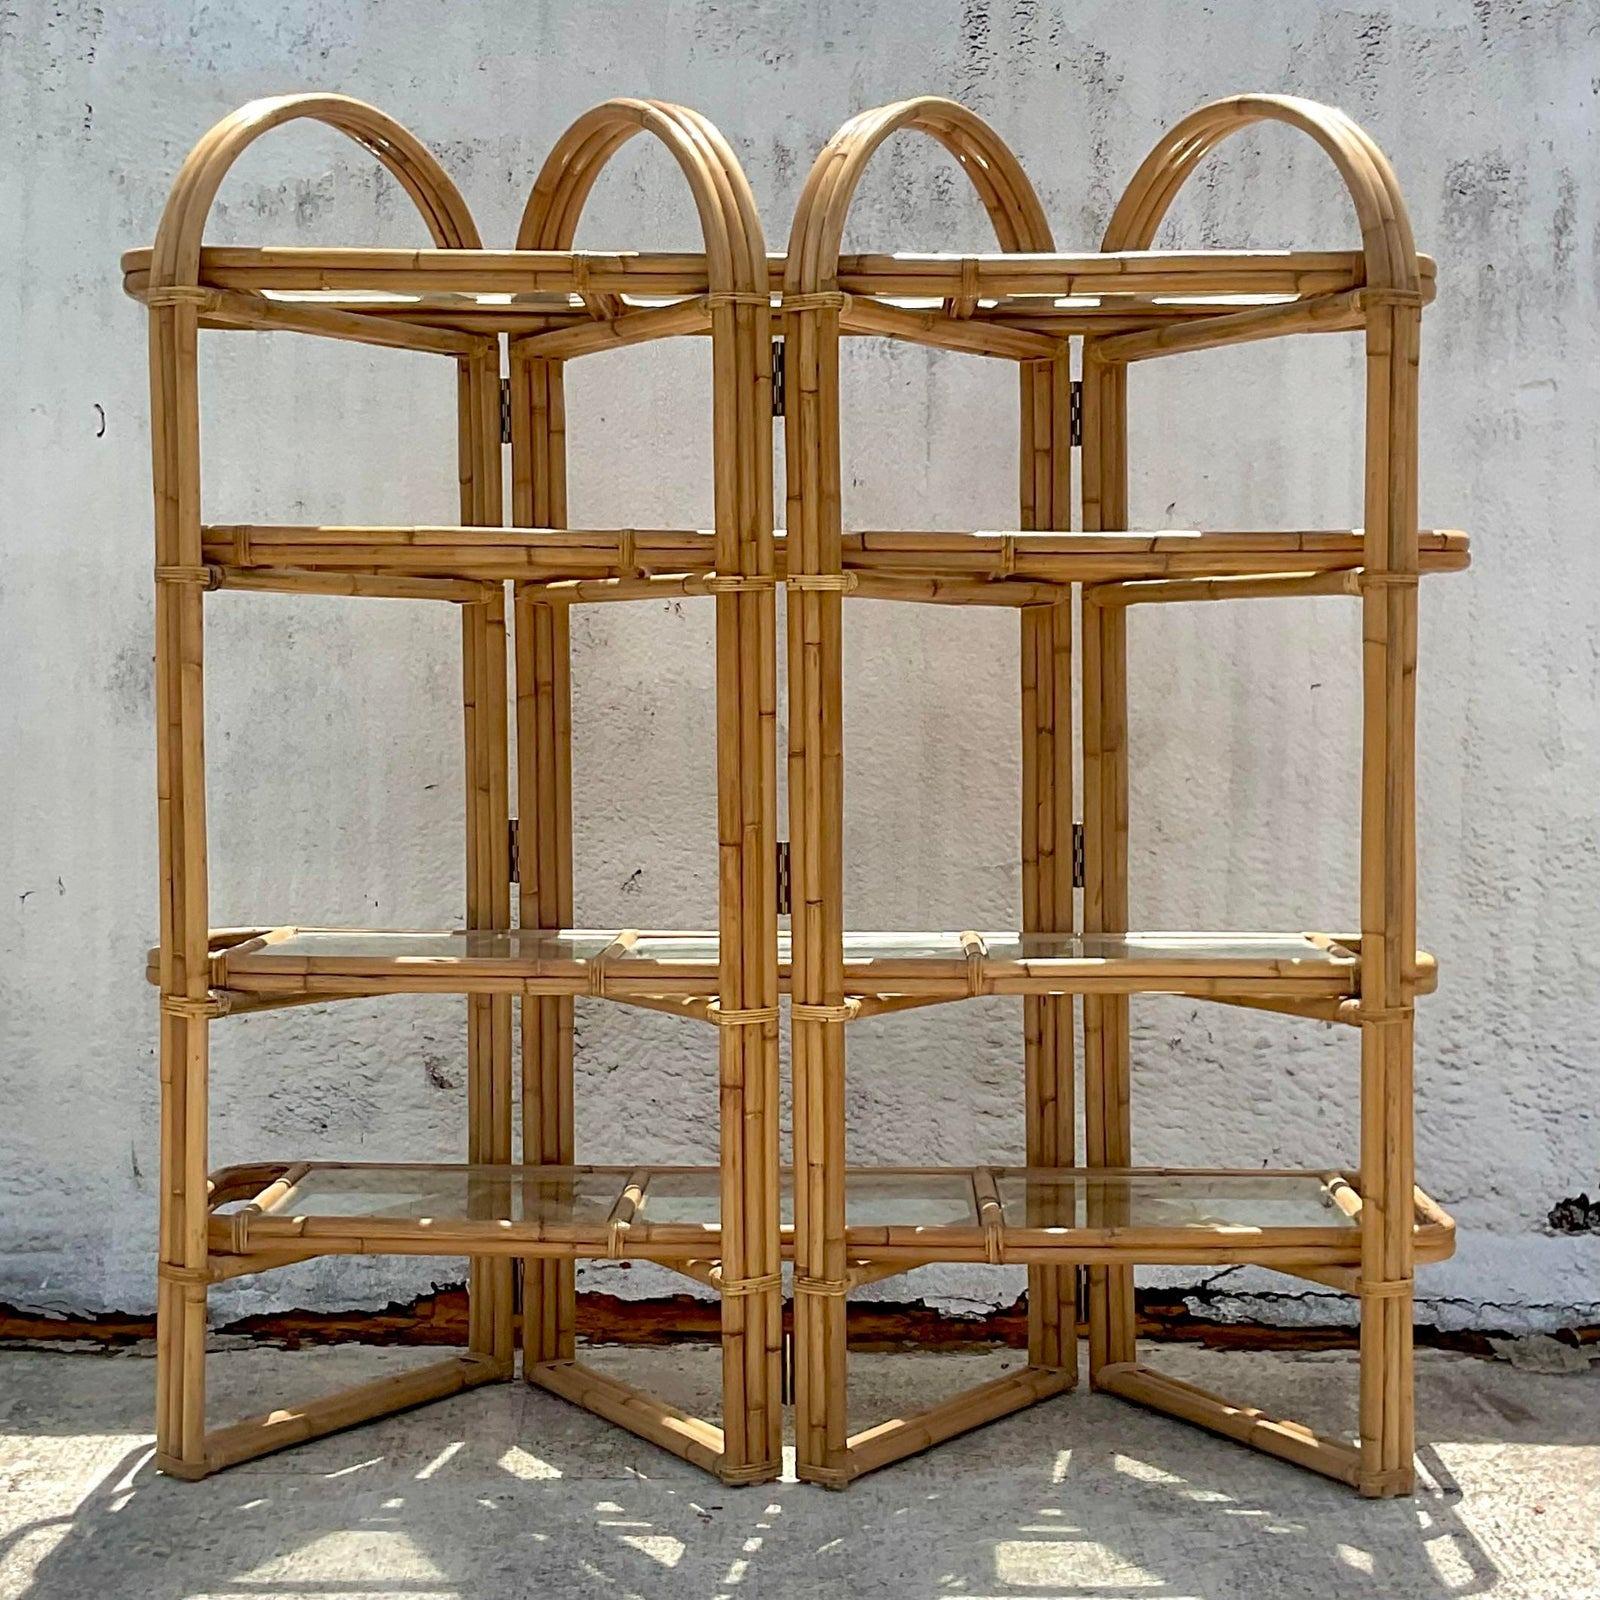 A fabulous vintage Coastal etagere. Beautiful bent rattan in a folding arch design. Inset rattan framed glass shelves. Acquired from a Palm Beach estate.